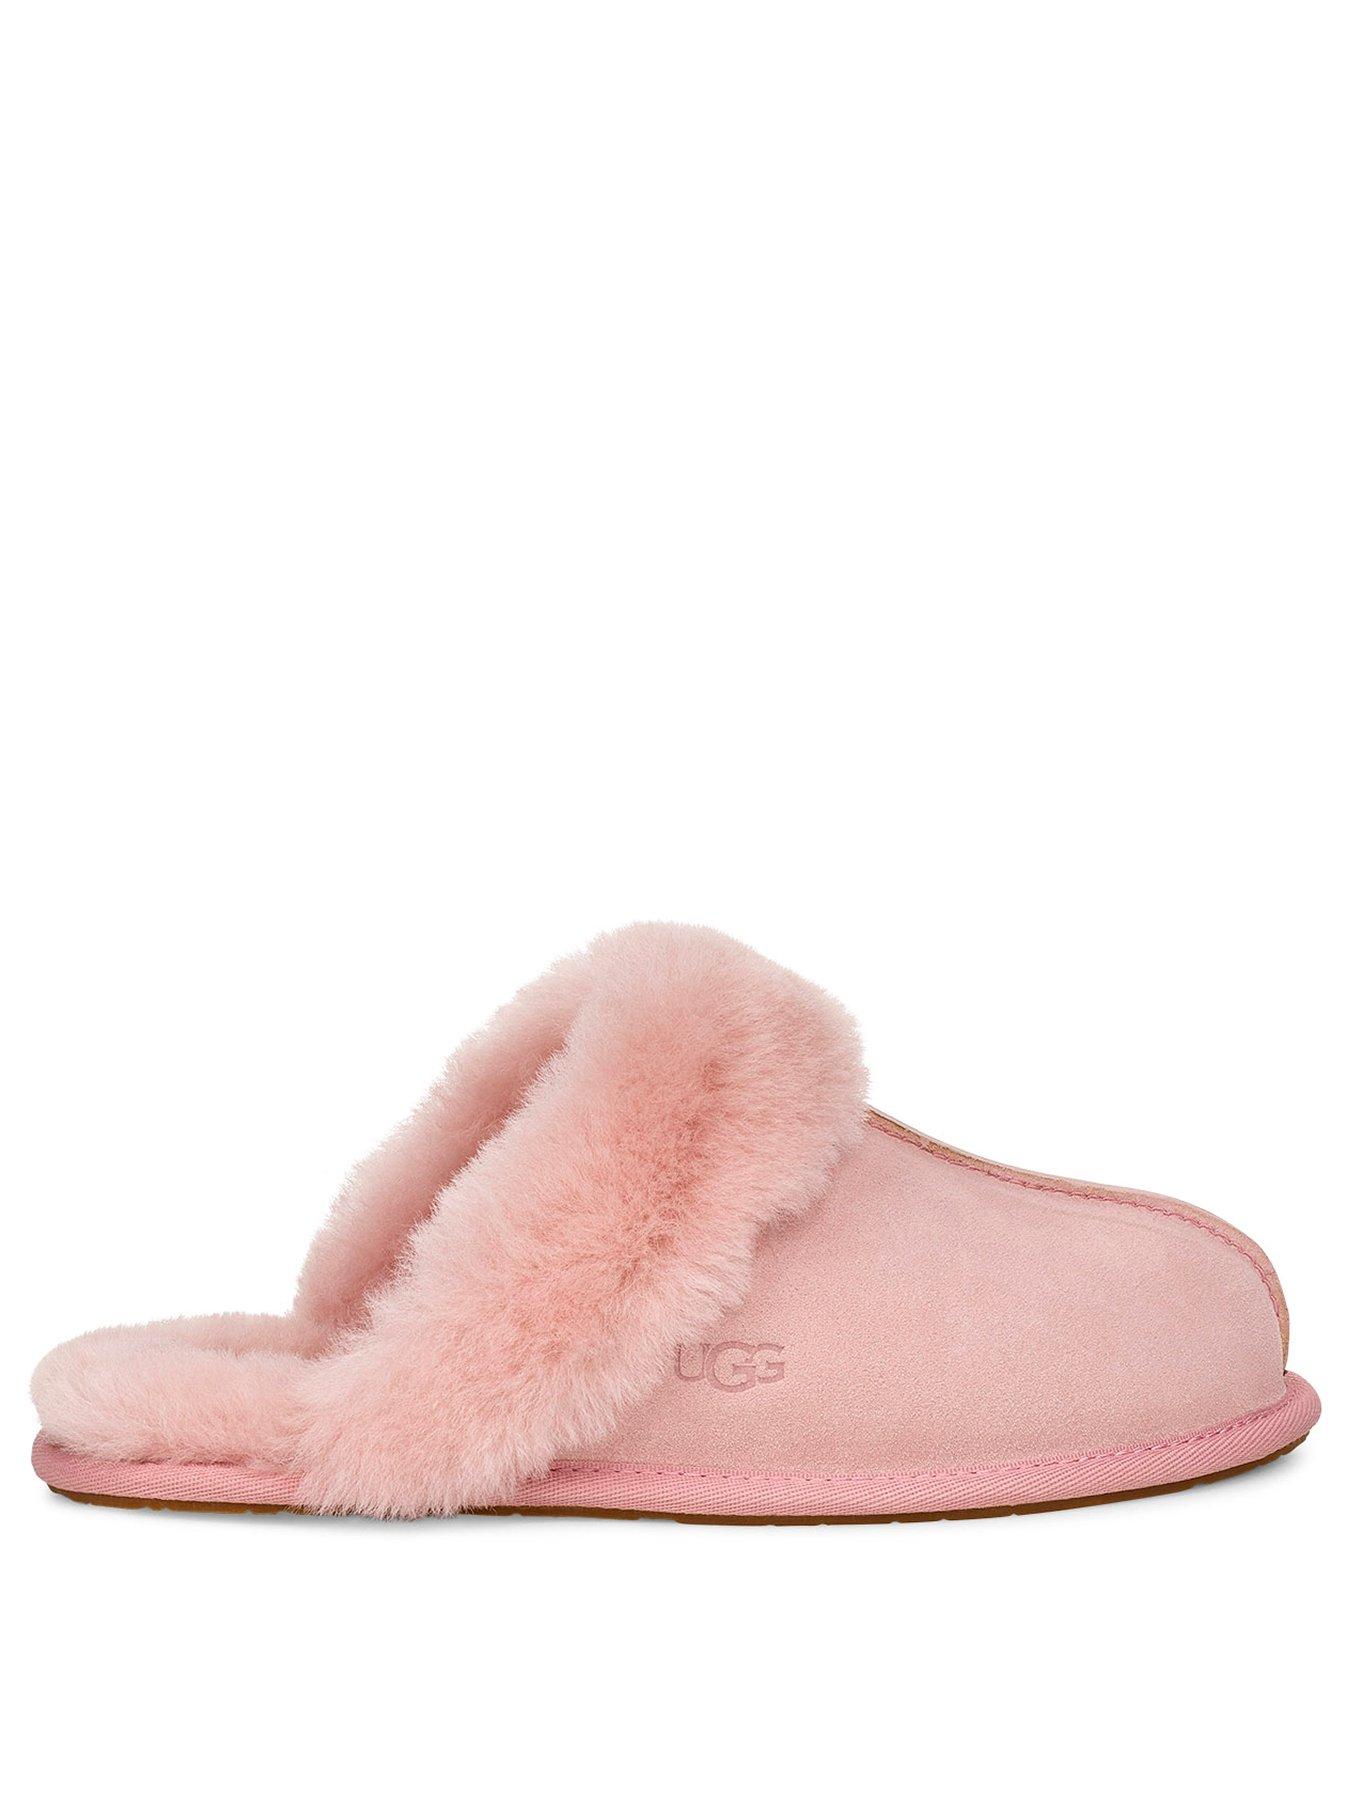 ugg slippers cost